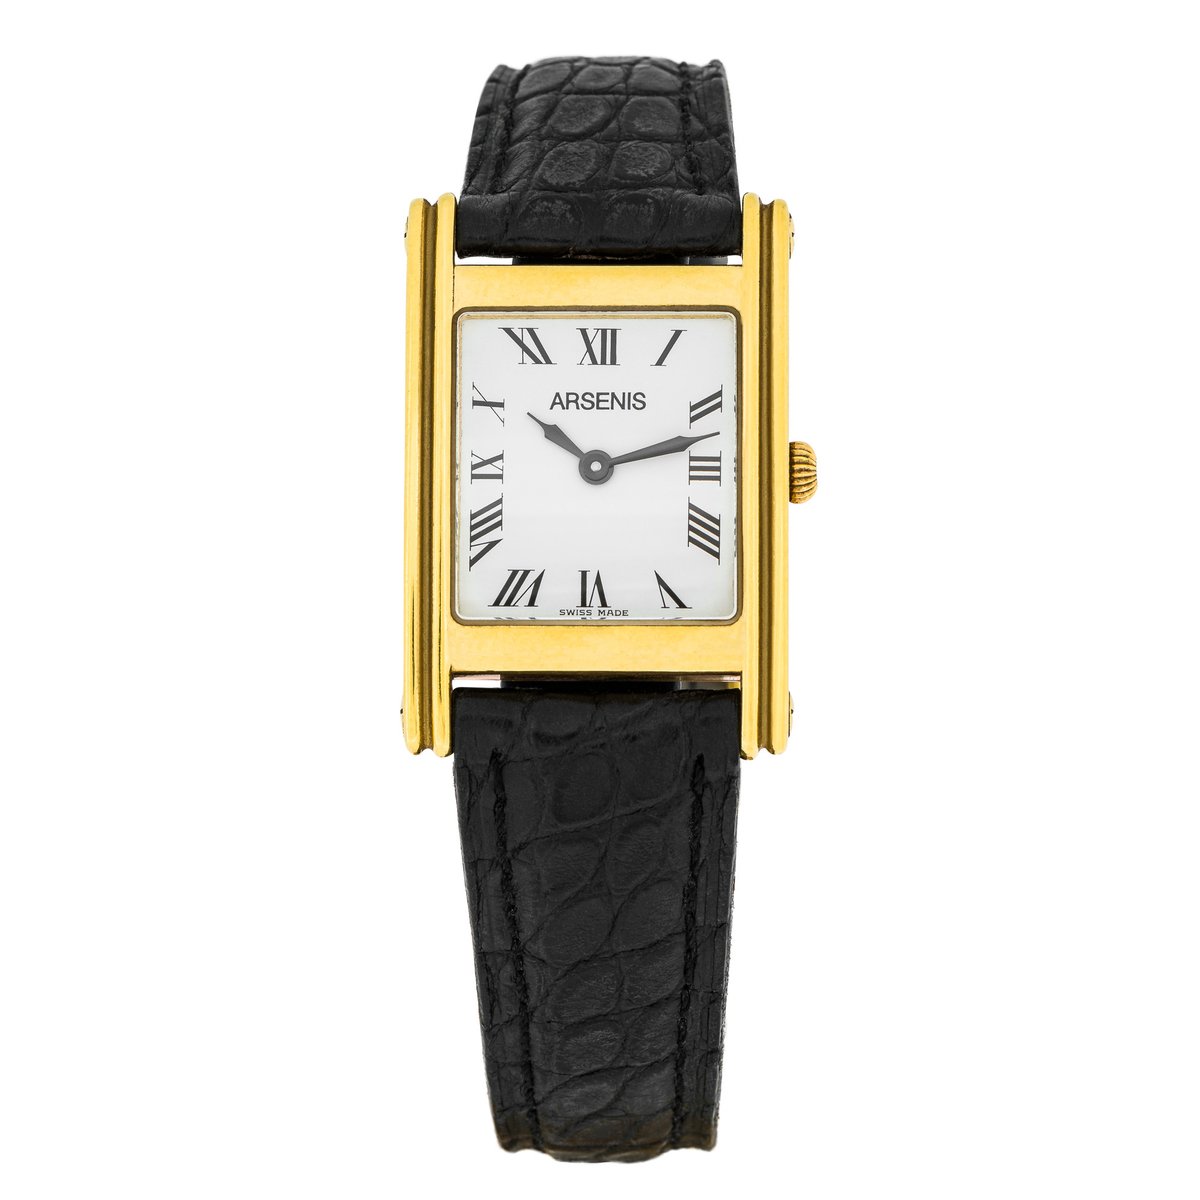 arsenis.gr/WATCHES?produc… The Arsenis Yellow Gold Collection recapture the original essence of his manufacture: the fusion of gold and leather in a chic aesthetic, with bold geometric lines complimenting precious metals.

#arsenis #orthogon #swissmade #arseniswatch #hautehorlogerie